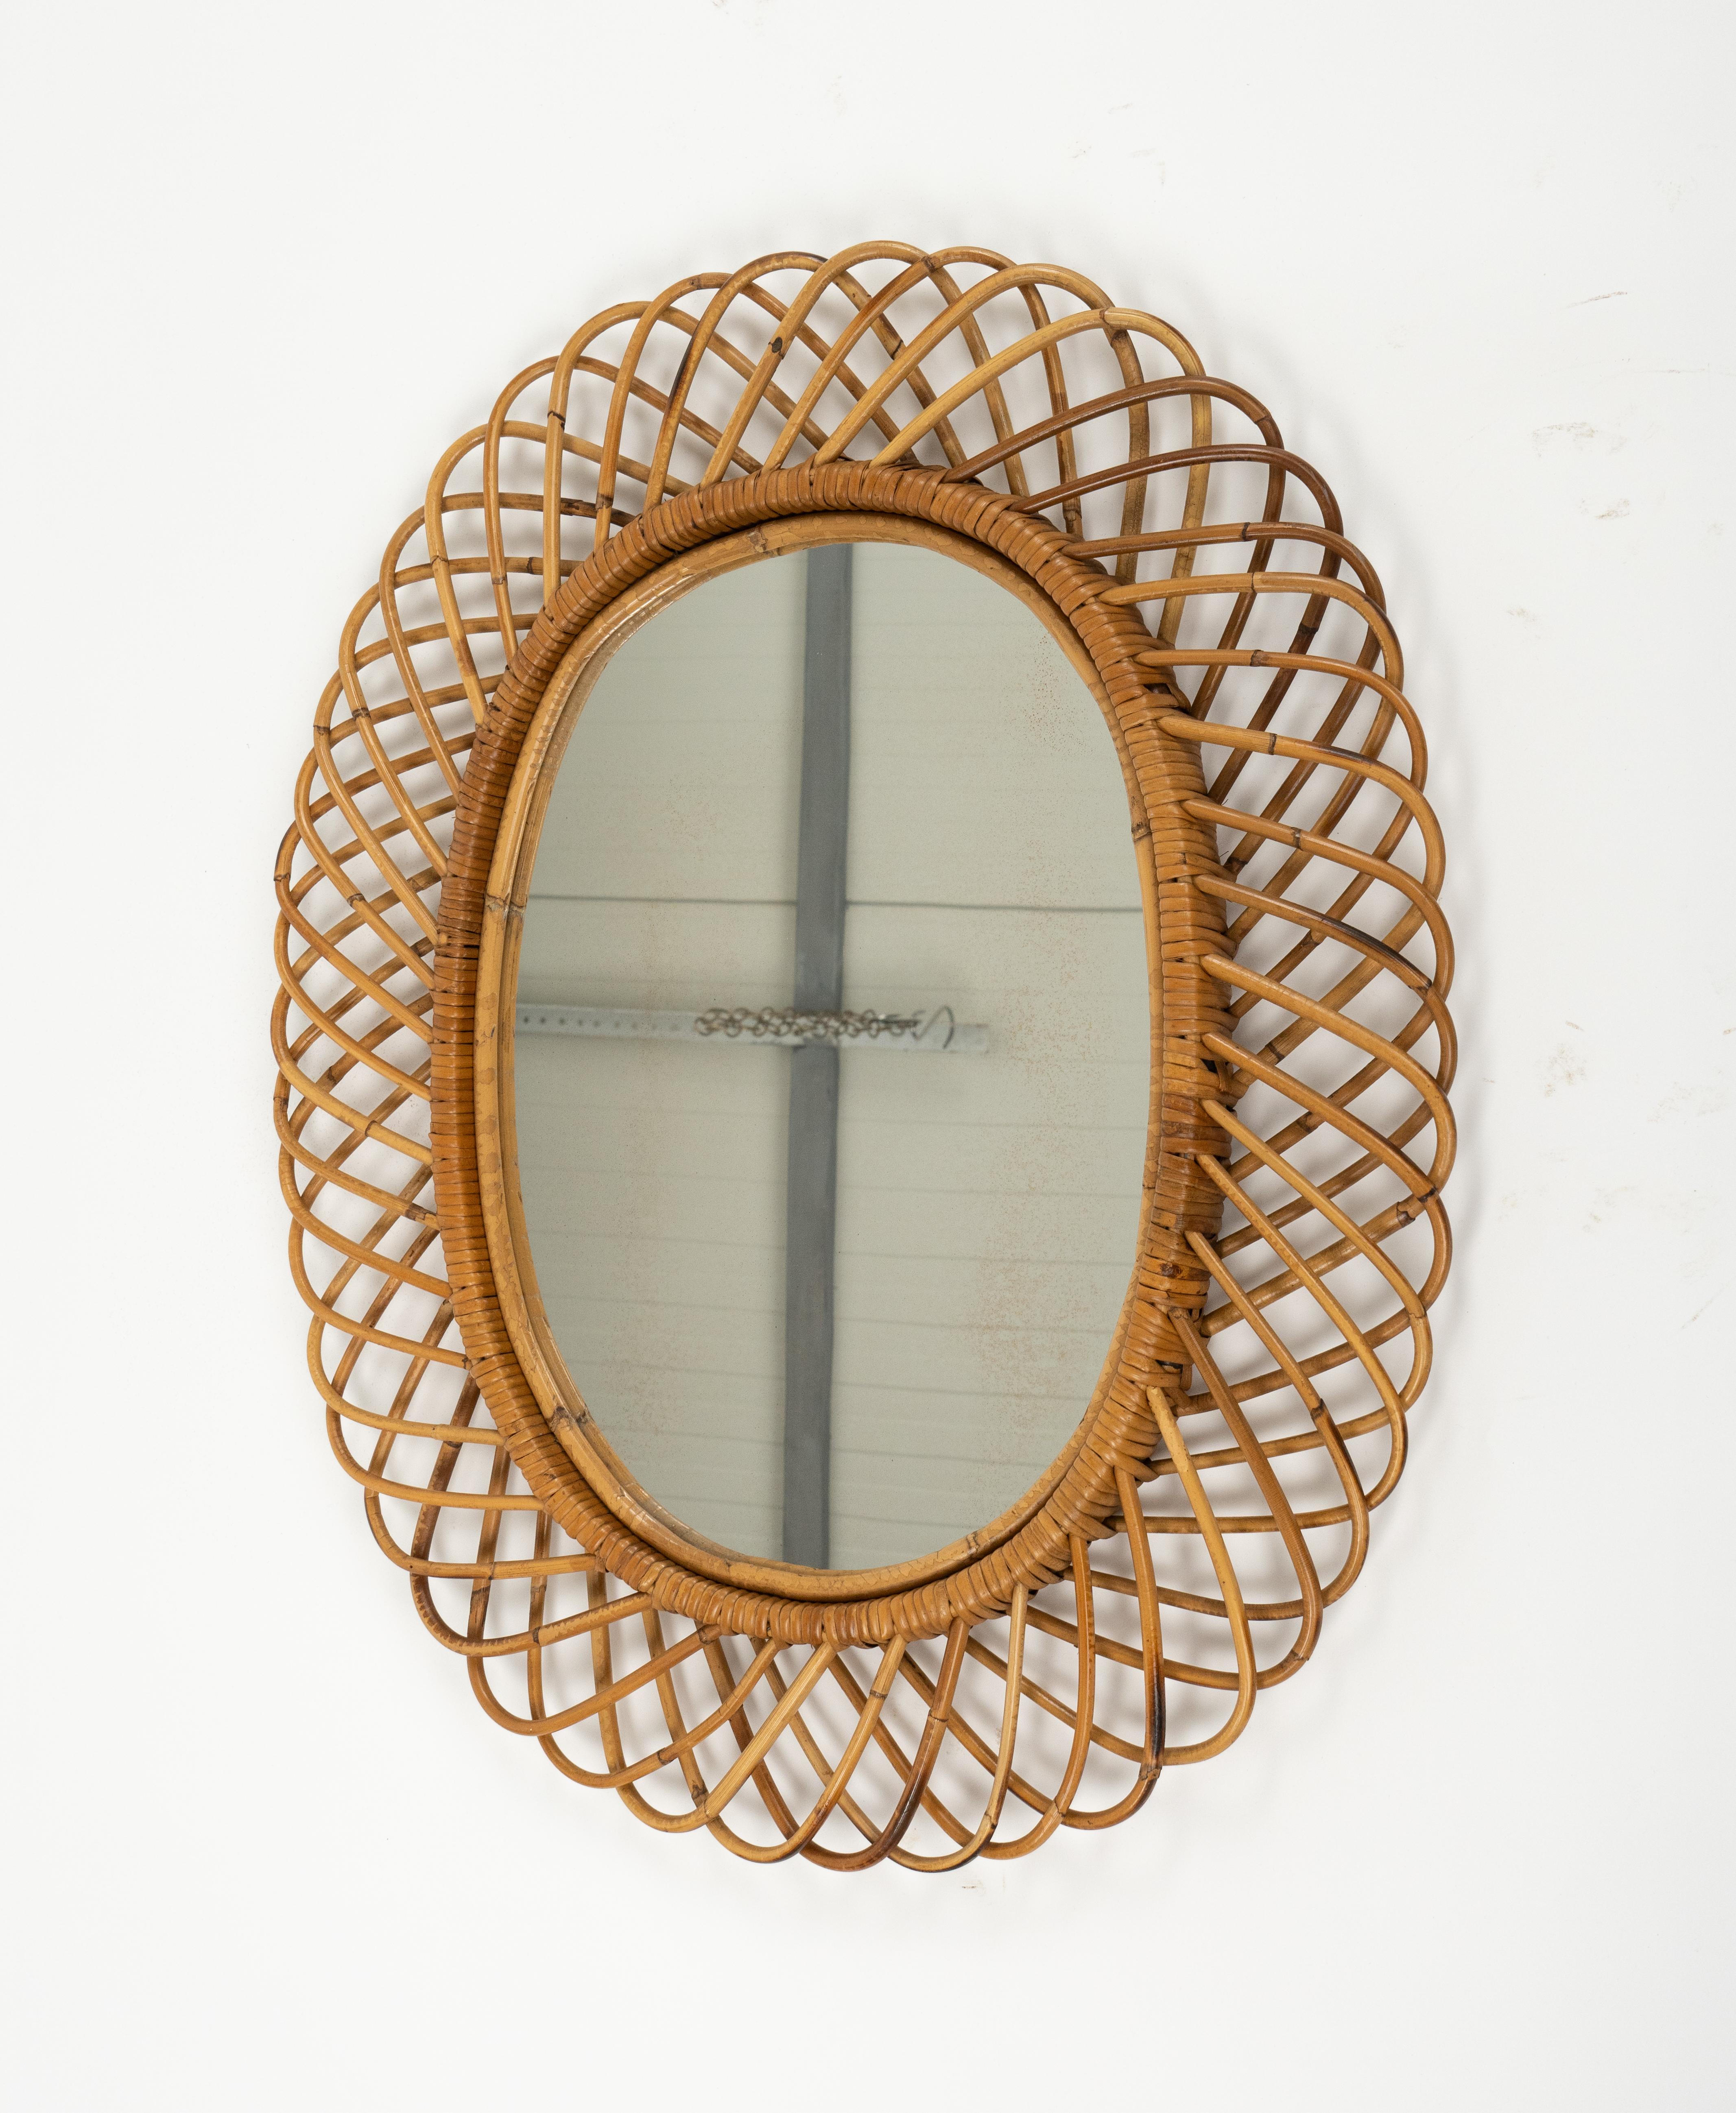 Midcentury Rattan and Bamboo Oval Wall Mirror by Franco Albini, Italy 1960s For Sale 6